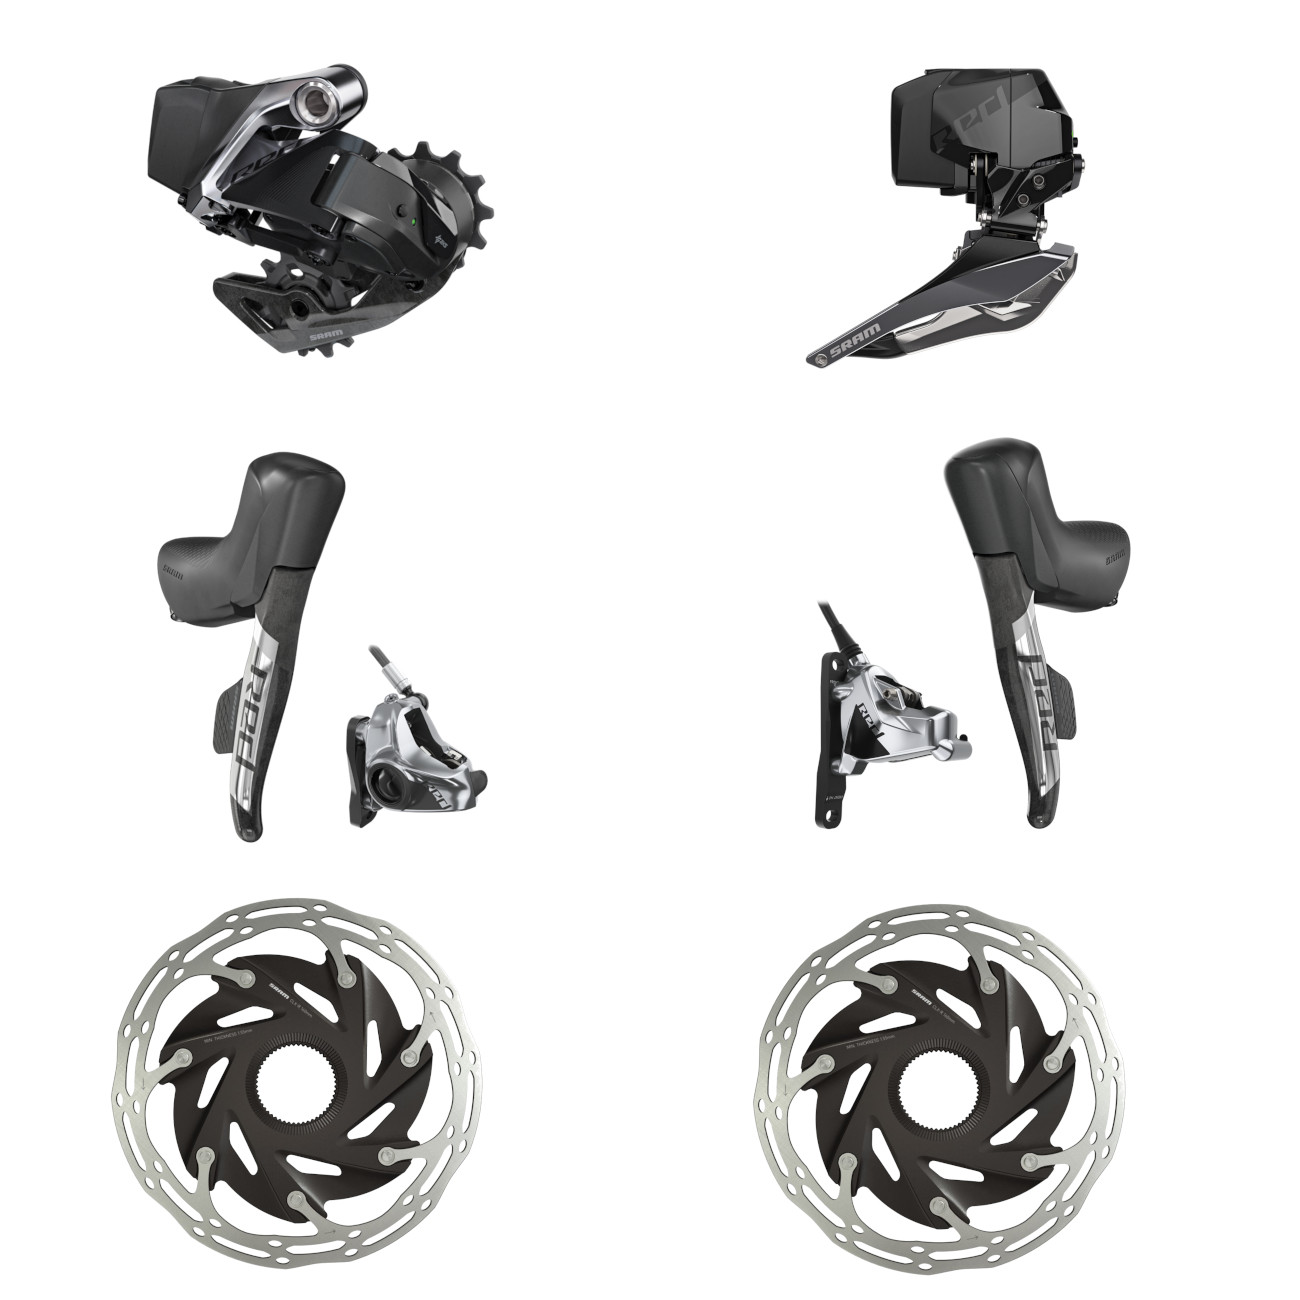 Picture of SRAM RED eTap AXS HRD 2x12 Upgrade Set with Hydraulic Disc Brakes - Flat Mount - Centerlock